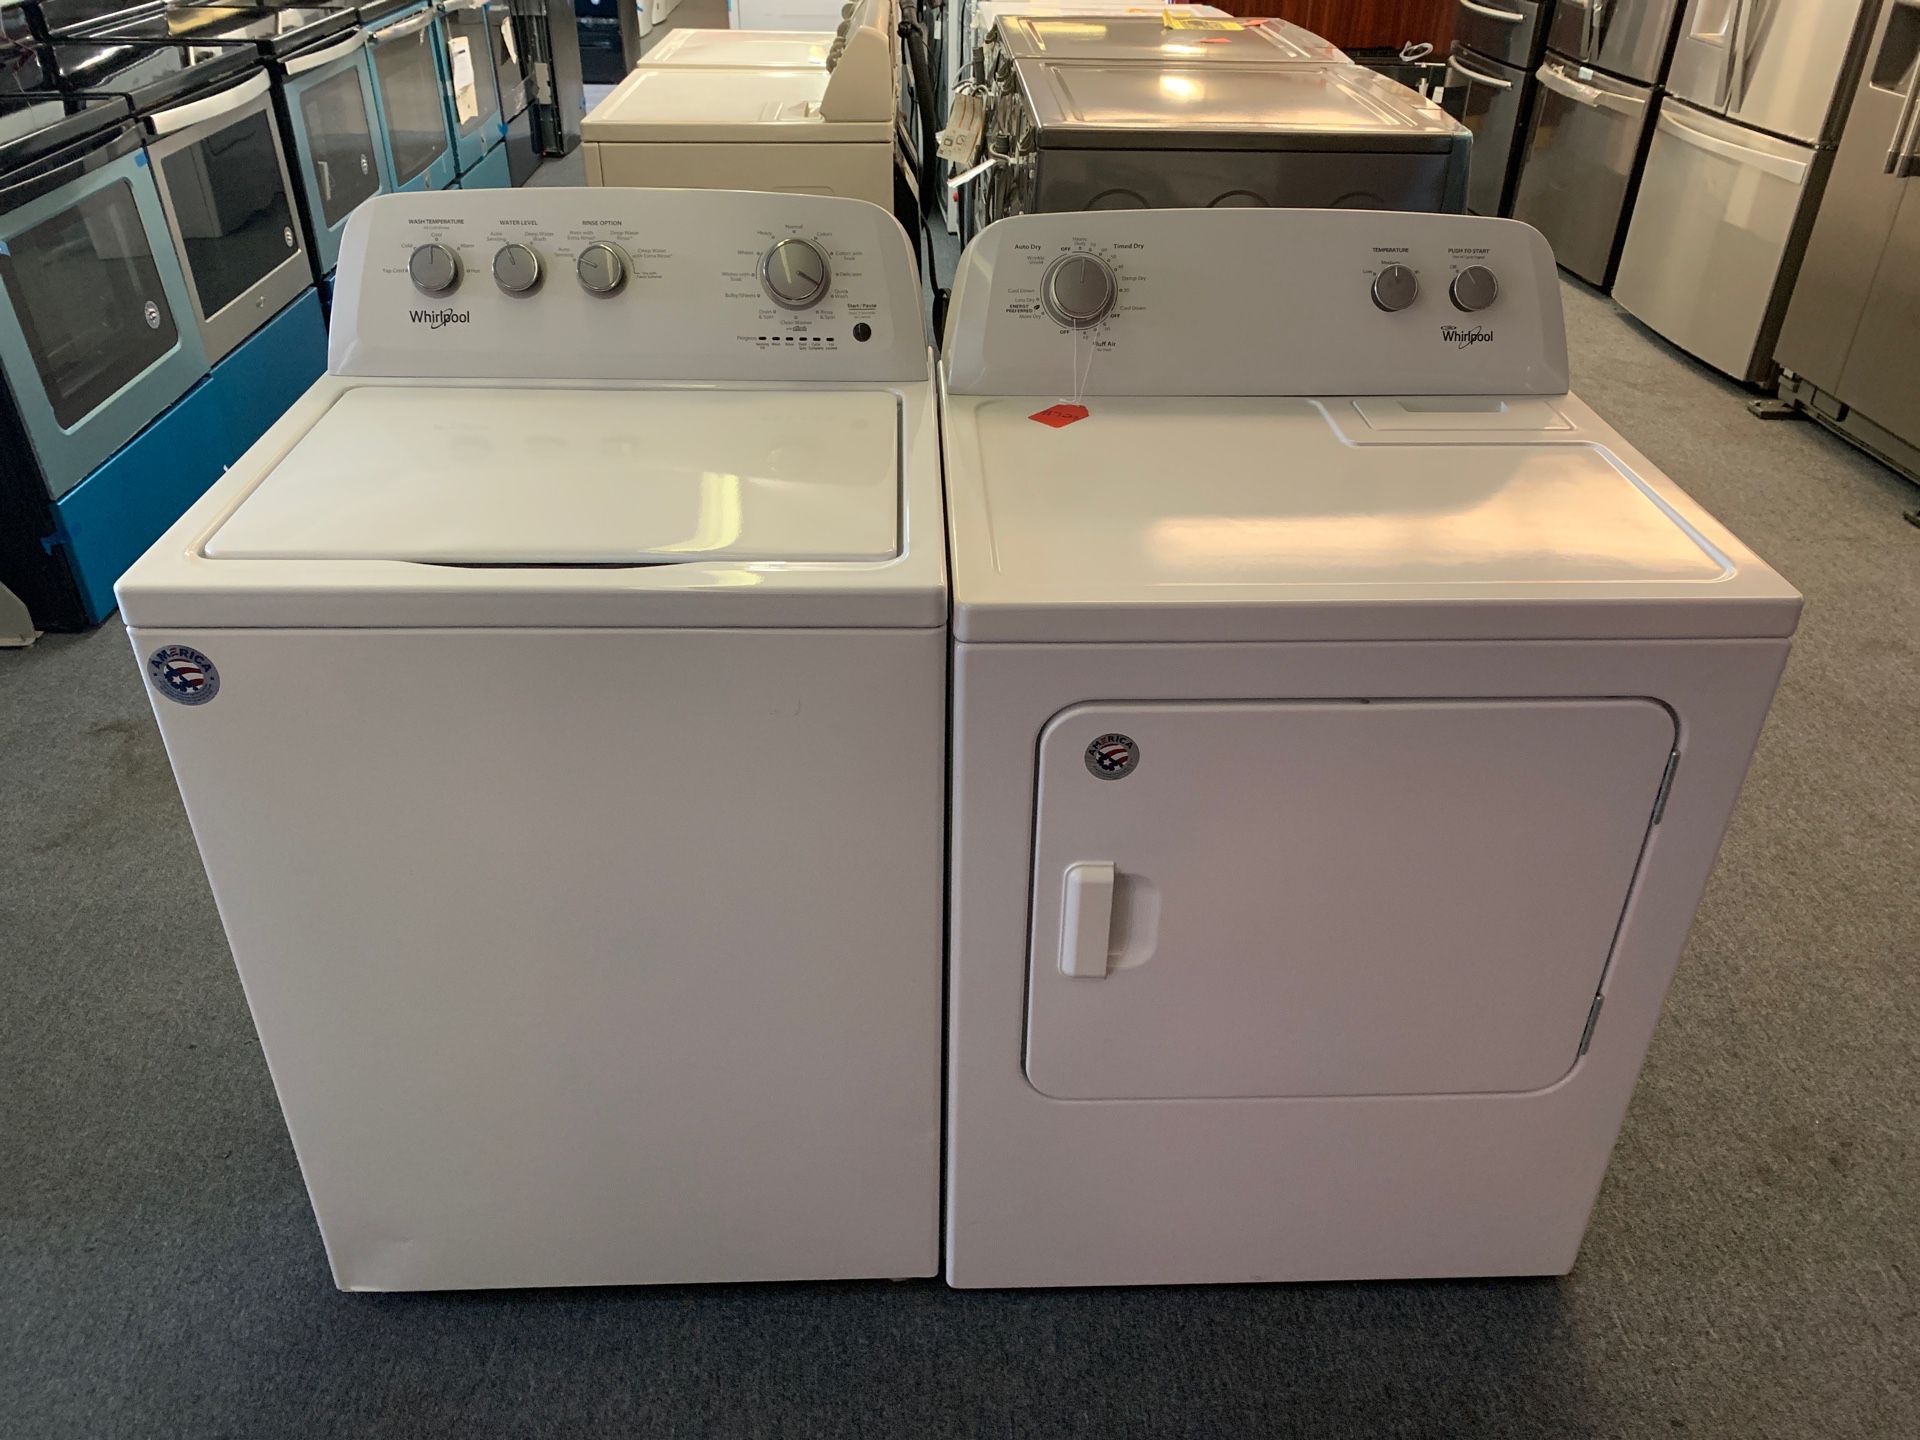 New scratch and dent Whirlpool washer and dryer set 1 year warranty